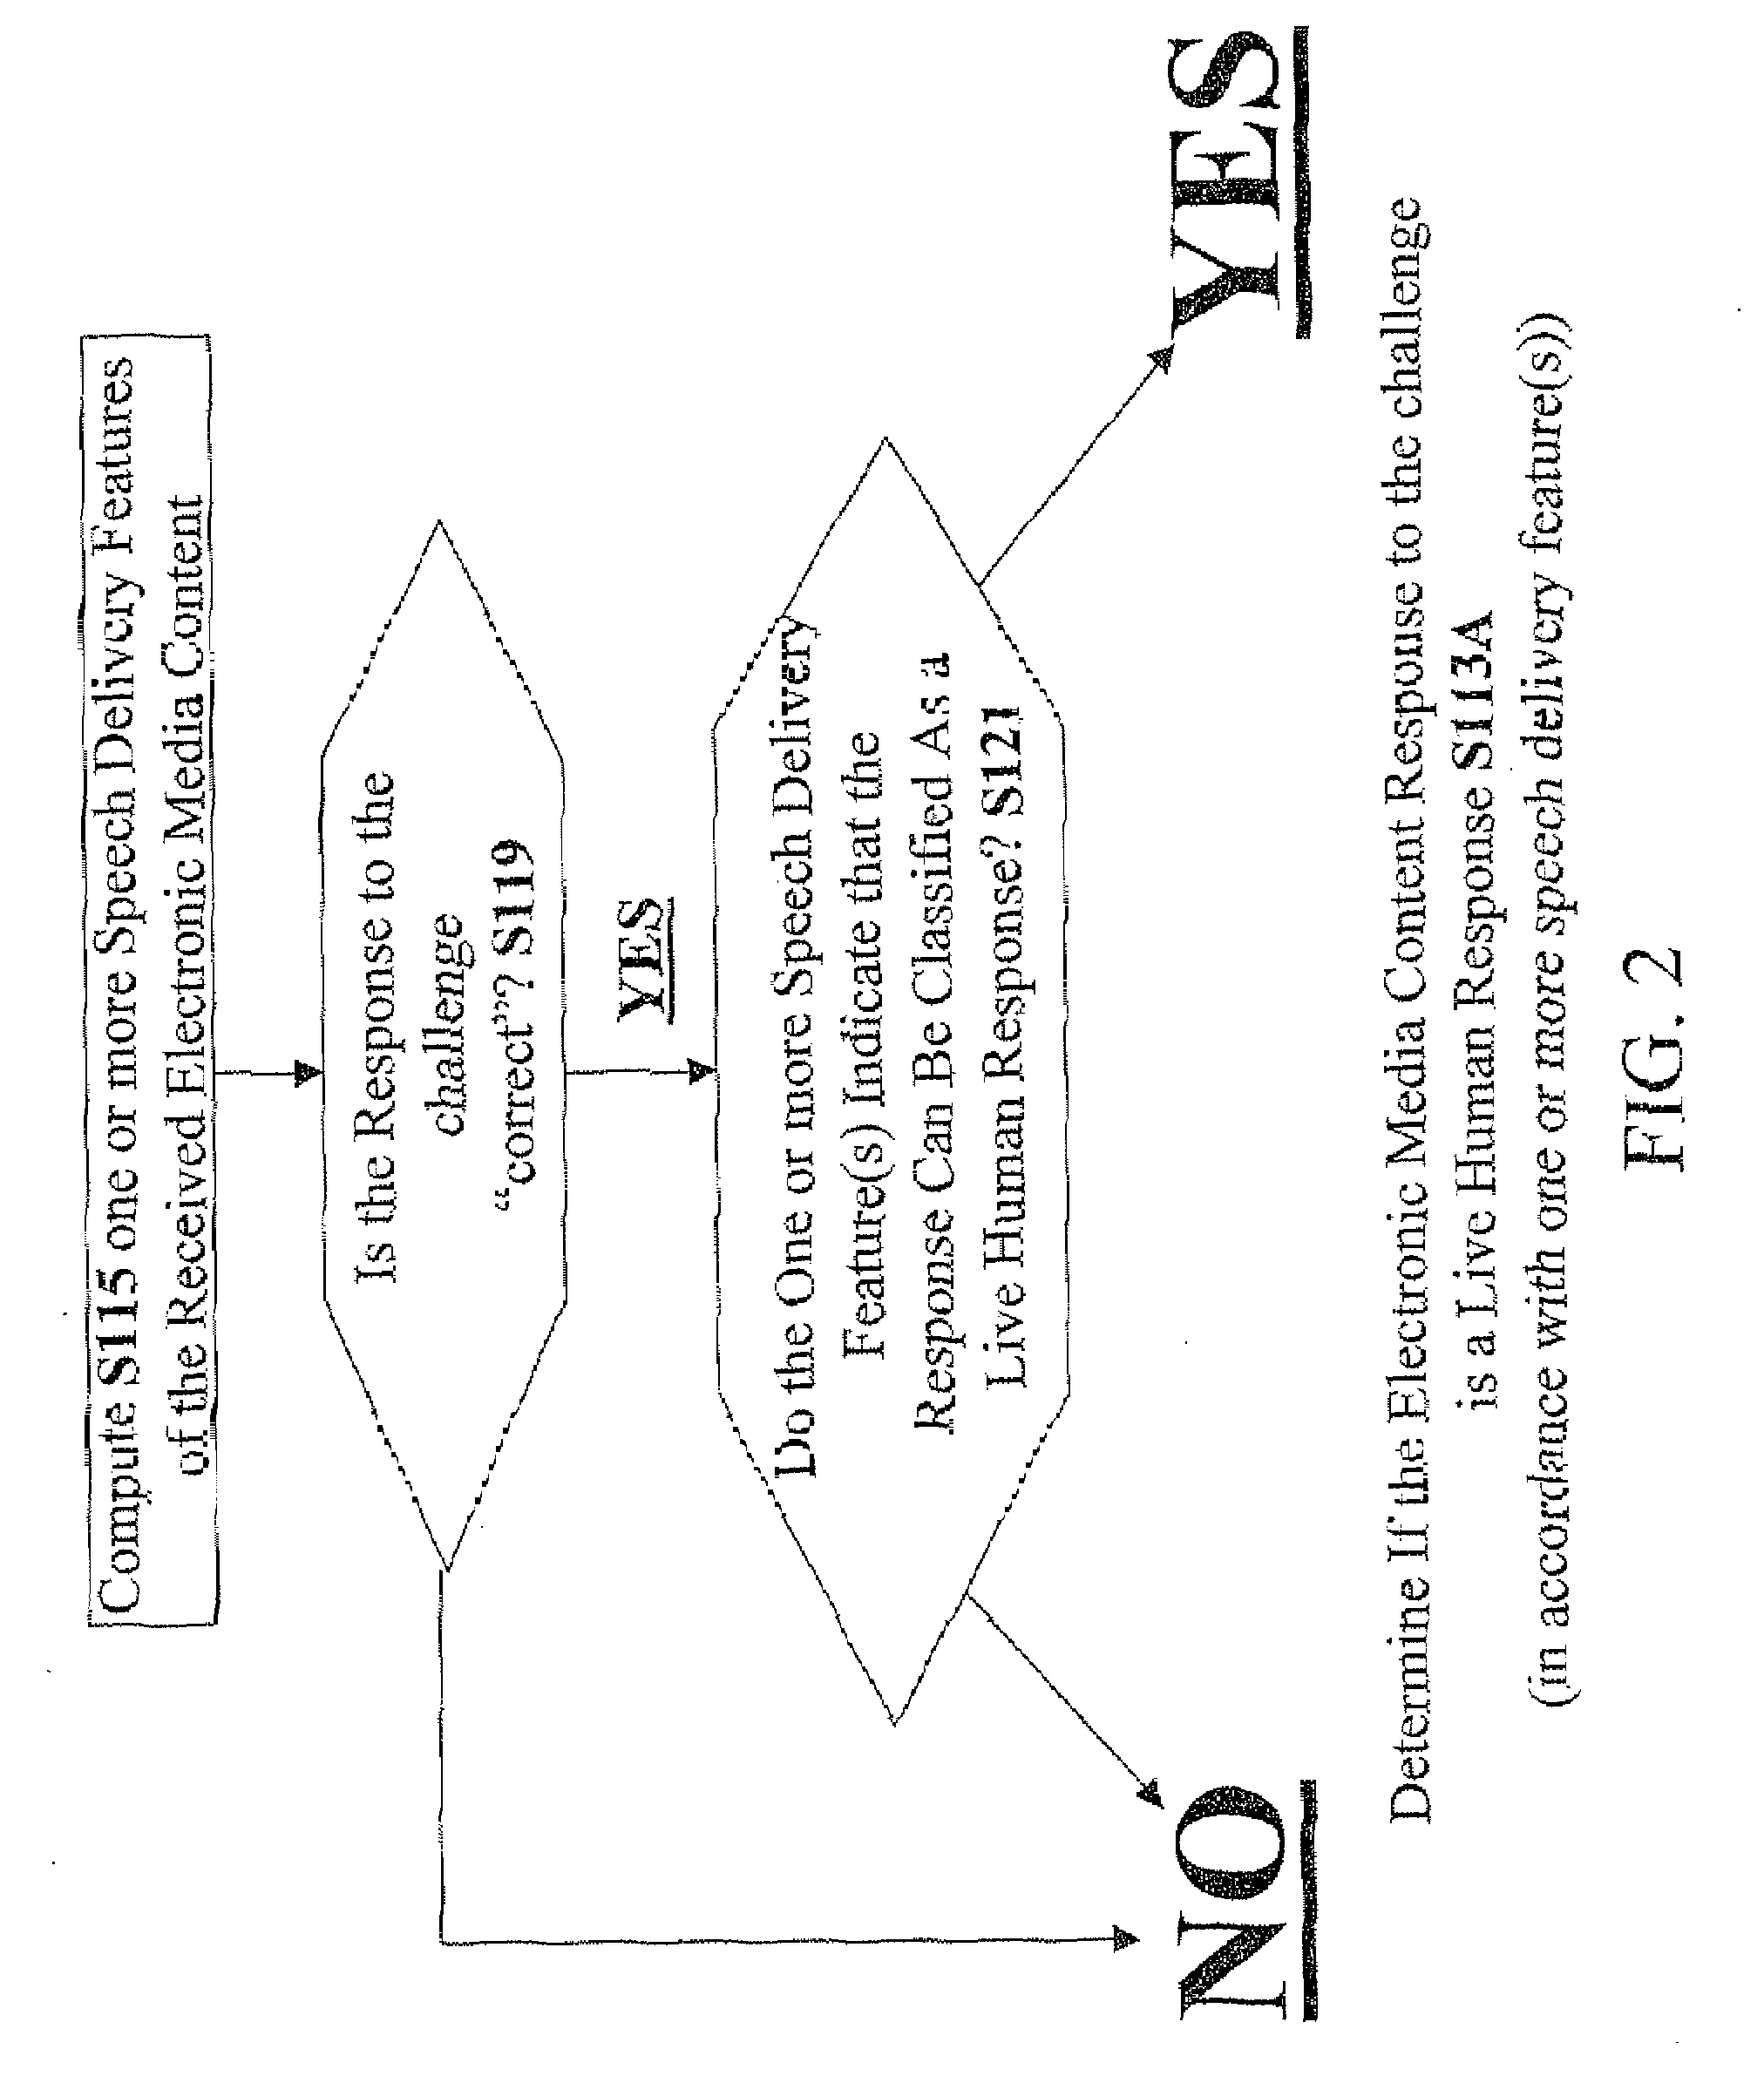 Method, apparatus and computer code for selectively providing access to a service in accordance with spoken content received from a user